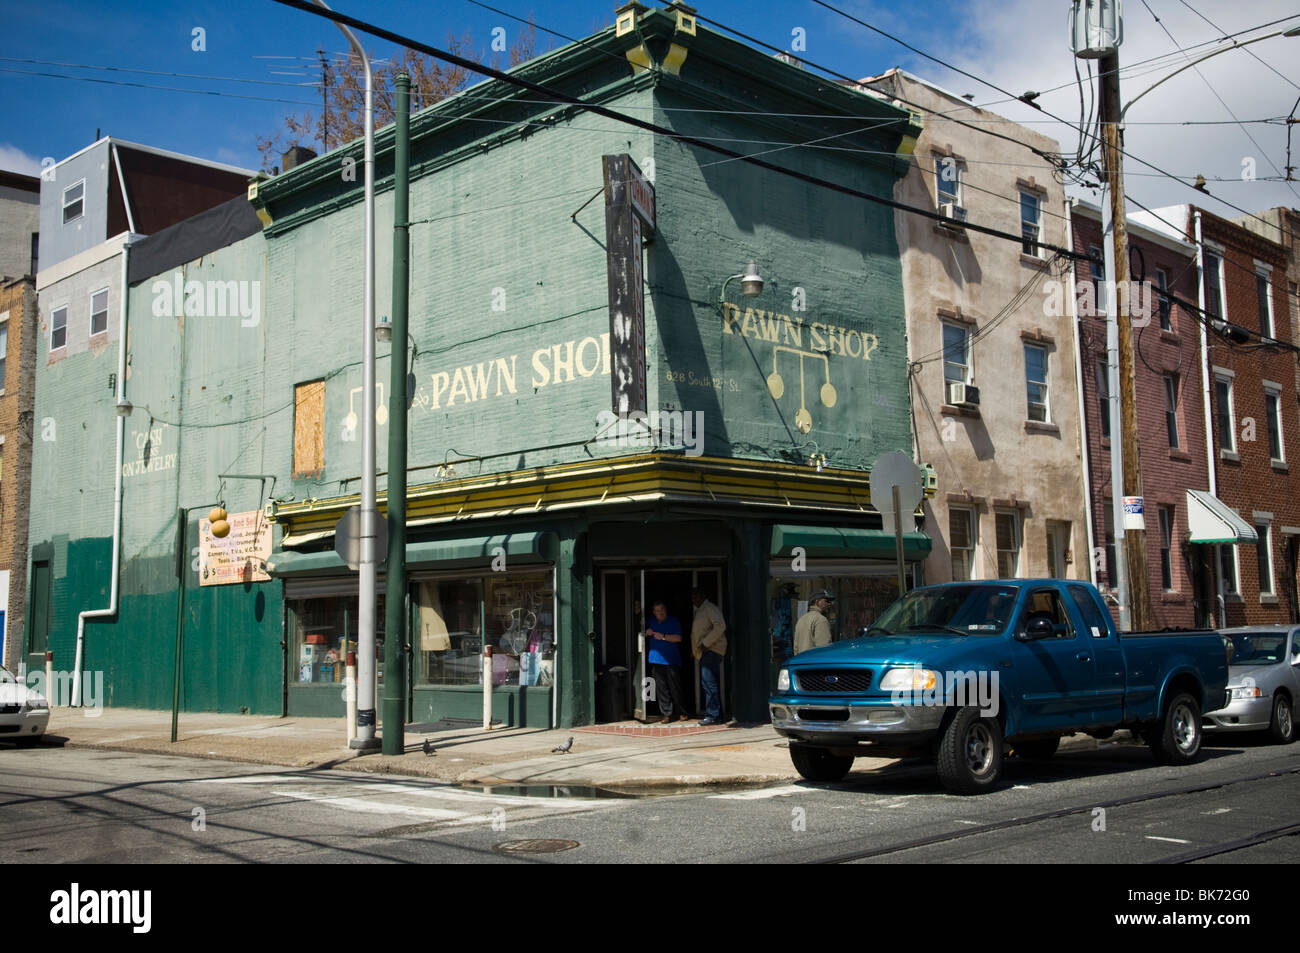 A pawn shop on South Street in Philadelphia, PA on Wednesday, March 31, 2010. (© Frances M. Roberts) Stock Photo